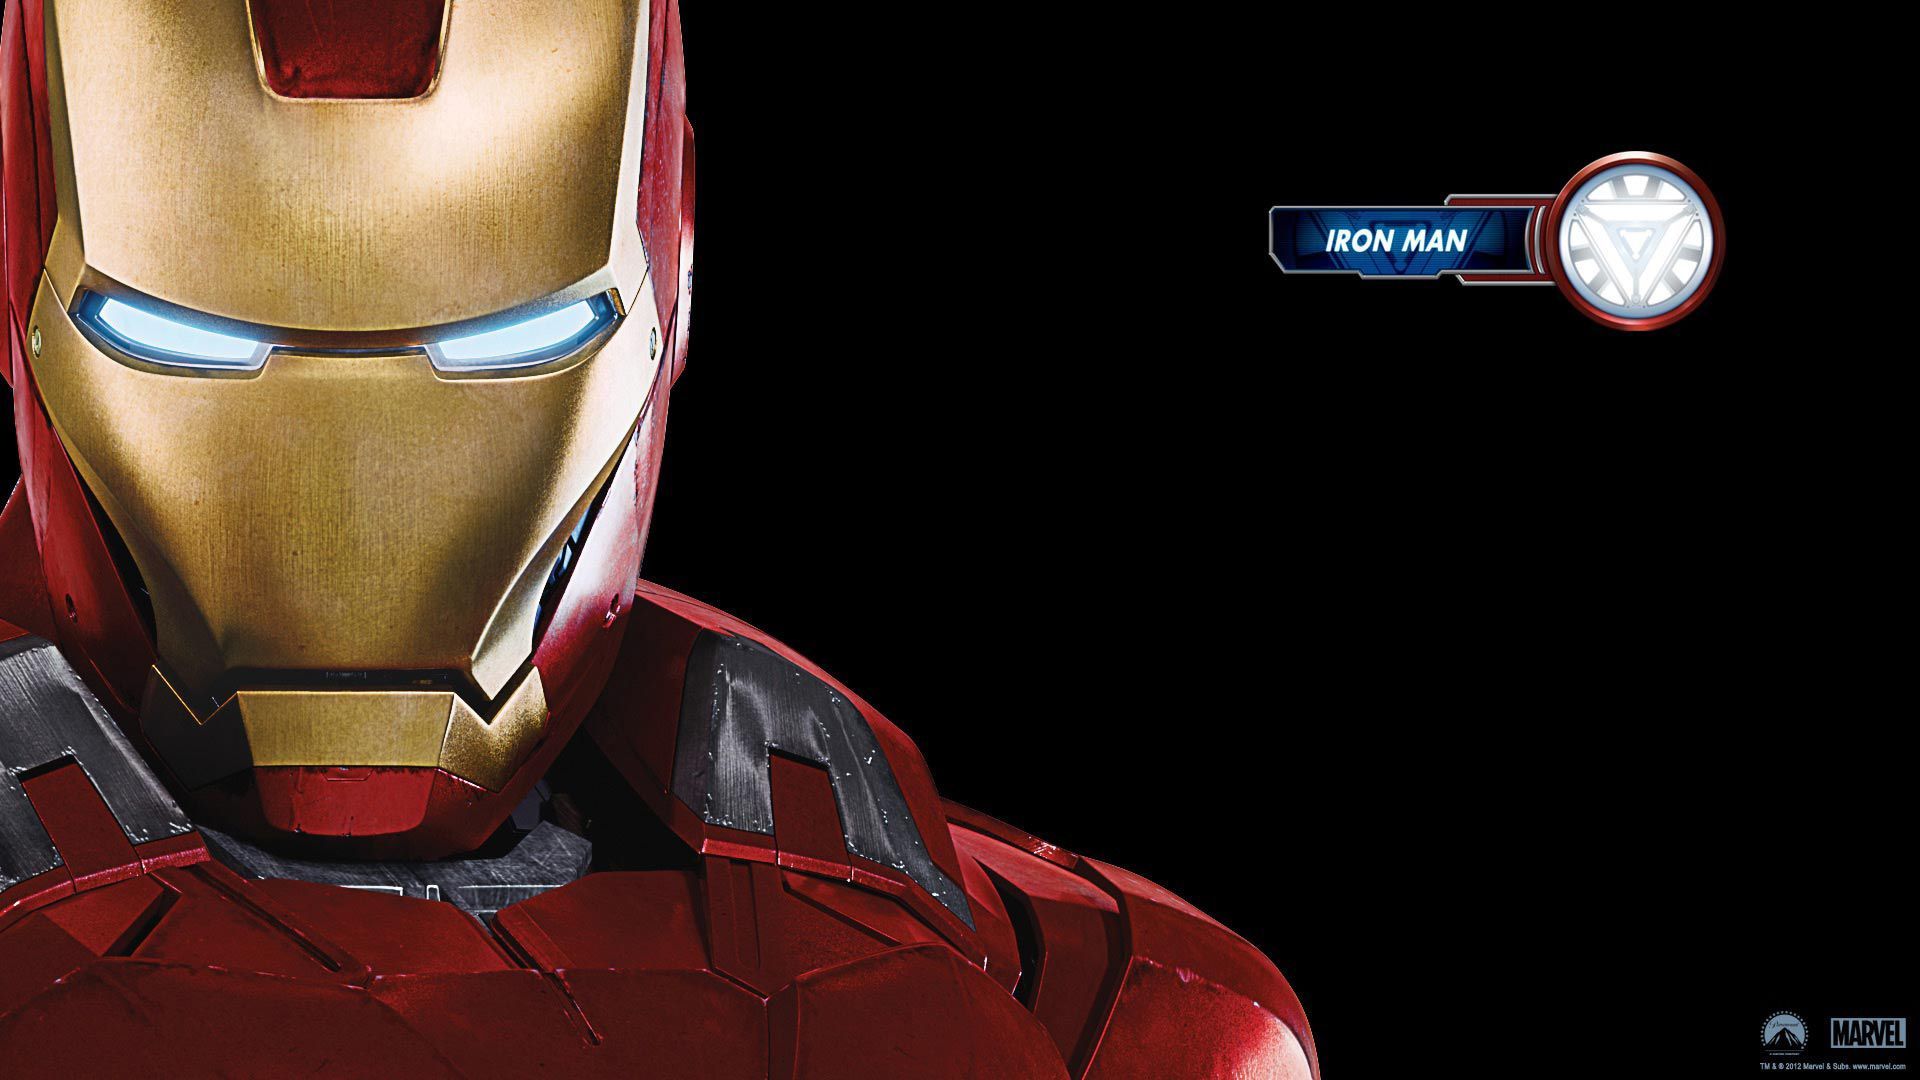 Iron Man in 2012 Avengers Wallpapers | HD Wallpapers